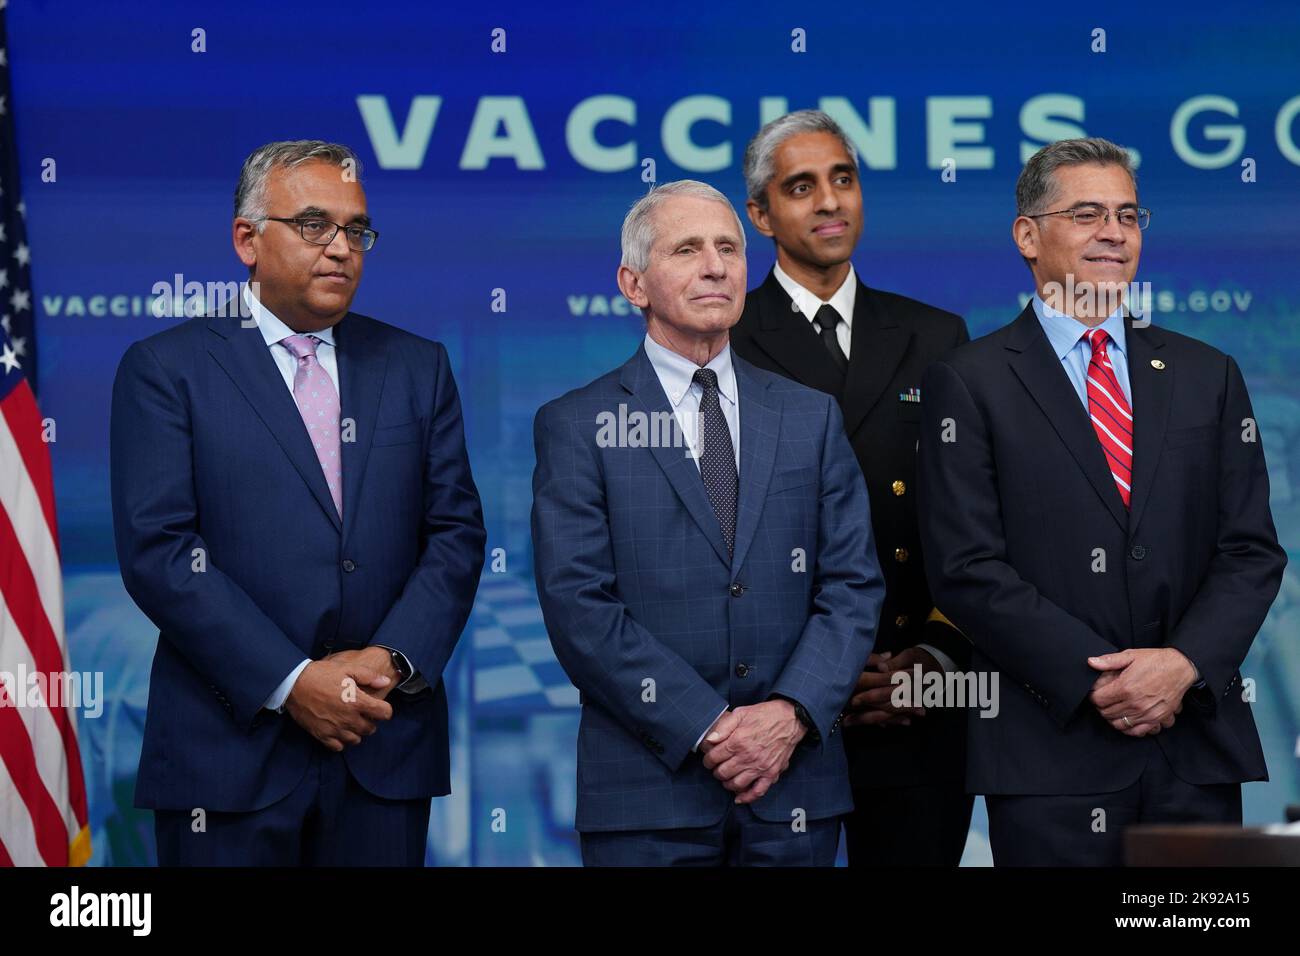 Ashish Jha, White House Covid-19 response coordinator, from left, Anthony Fauci, director of the National Institute of Allergy and Infectious Diseases, Vivek Murthy, US surgeon general, and Xavier Becerra, secretary of Health and Human Services (HHS), listen as US President Joe Biden, not pictured, speaks before receiving a booster dose of the Covid-19 vaccine targeting the Omicron BA.4/BA.5 subvariants in the Eisenhower Executive Office Building in Washington, DC, on Tuesday, October 25, 2022. The White House is asking businesses to help employees get updated coronavirus vaccines by hosting o Stock Photo